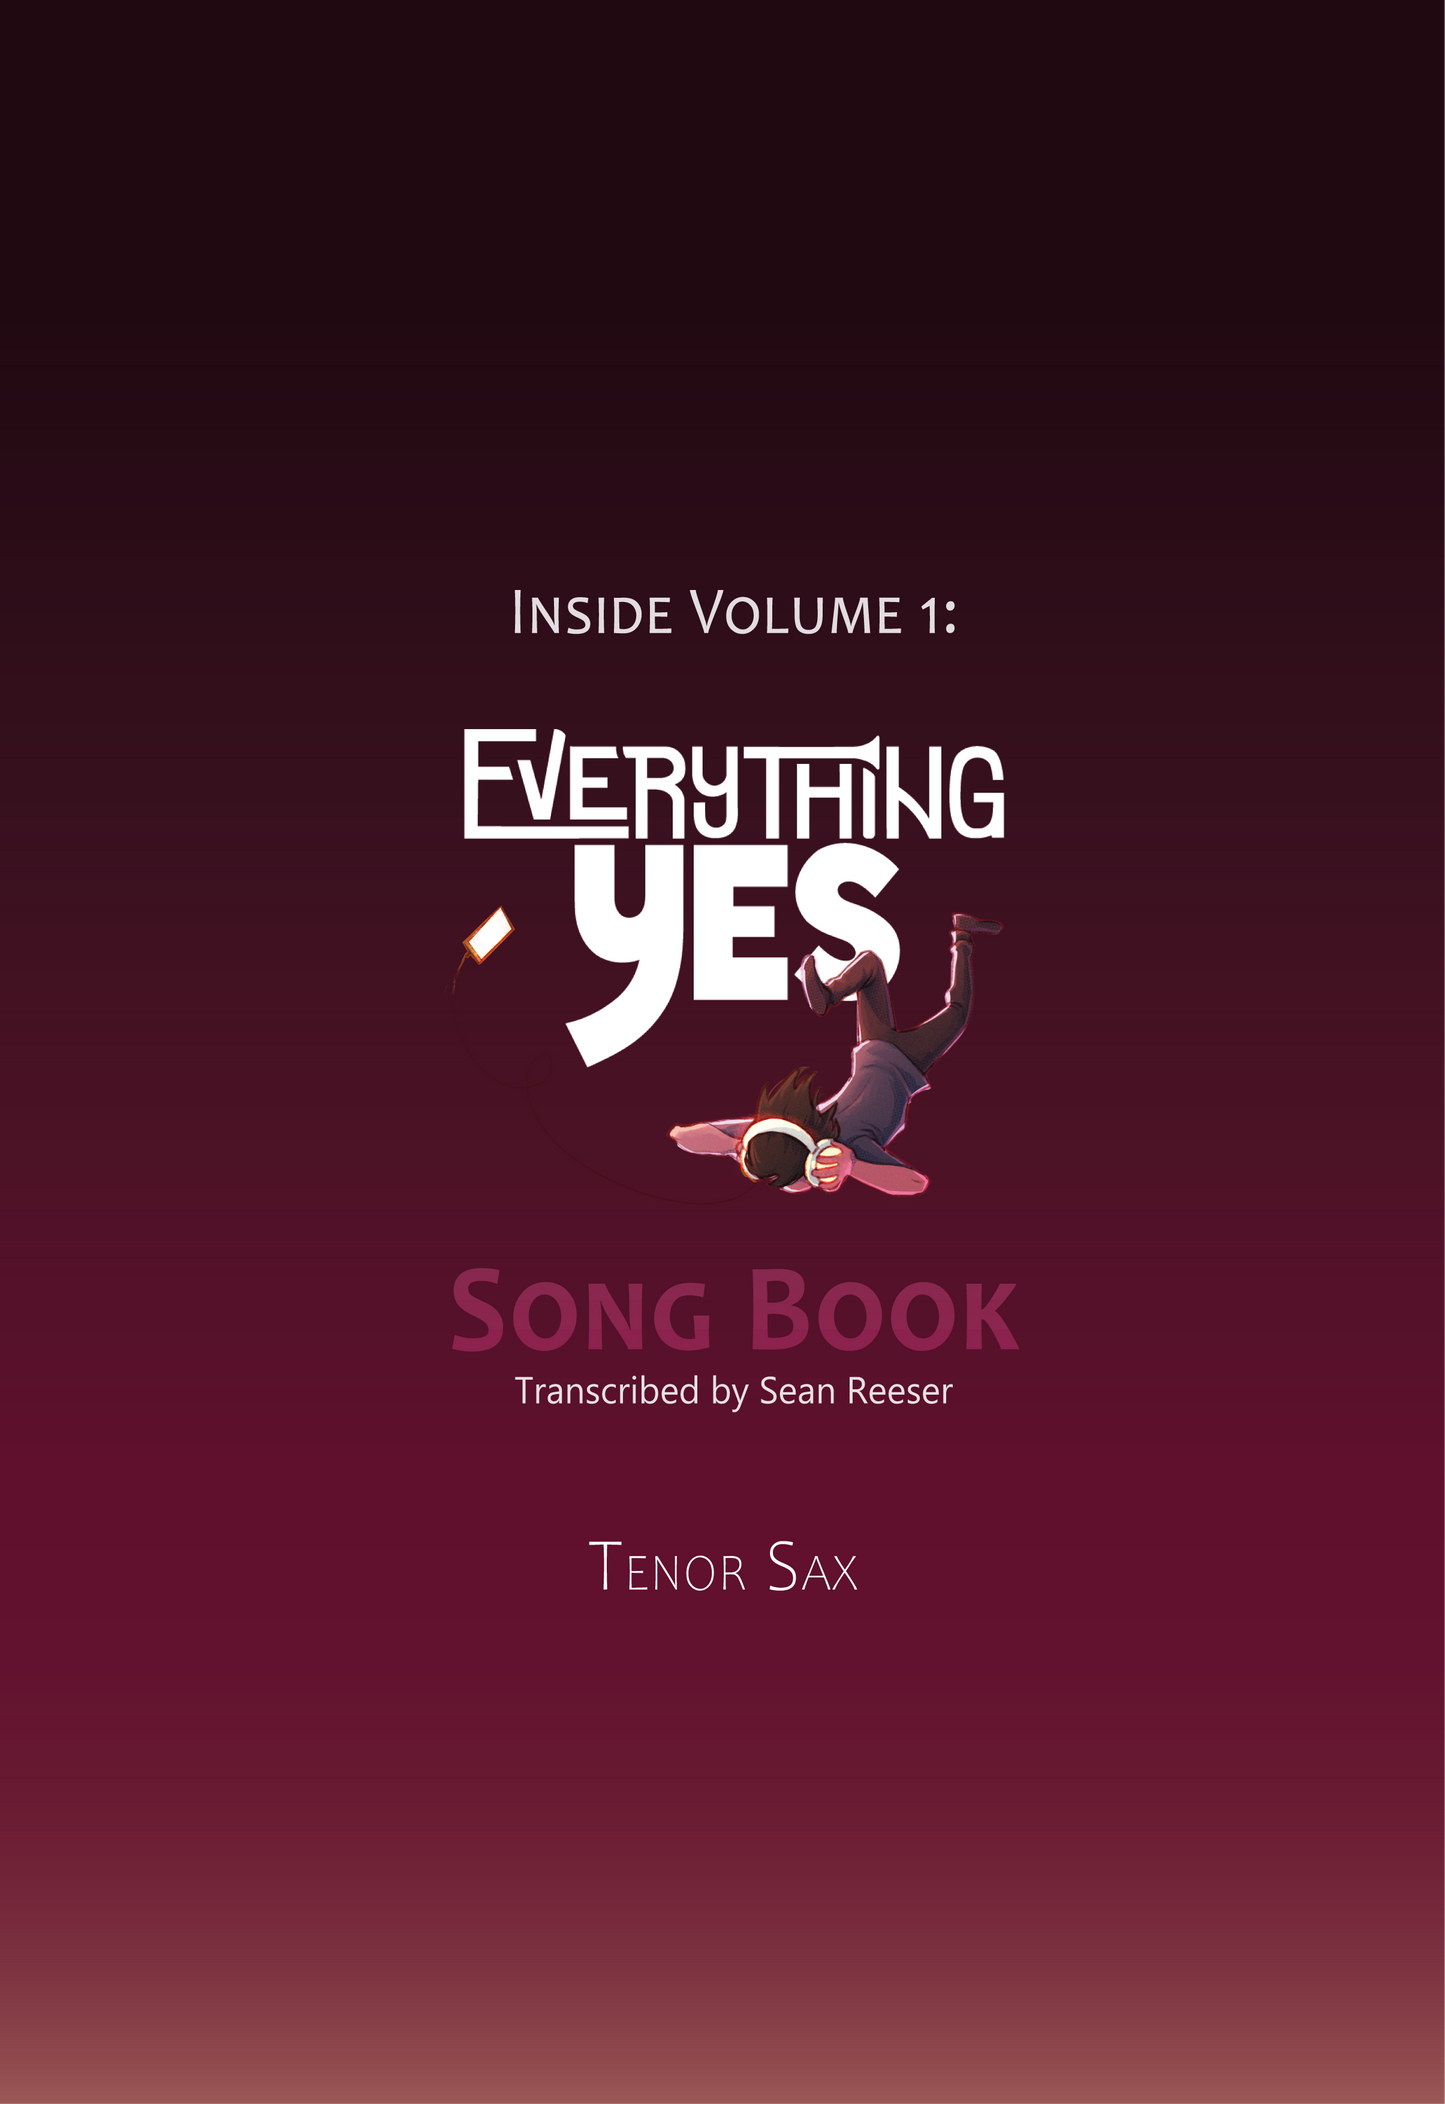 VOLUME 1 Tenor Sax - Everything Yes Song Book